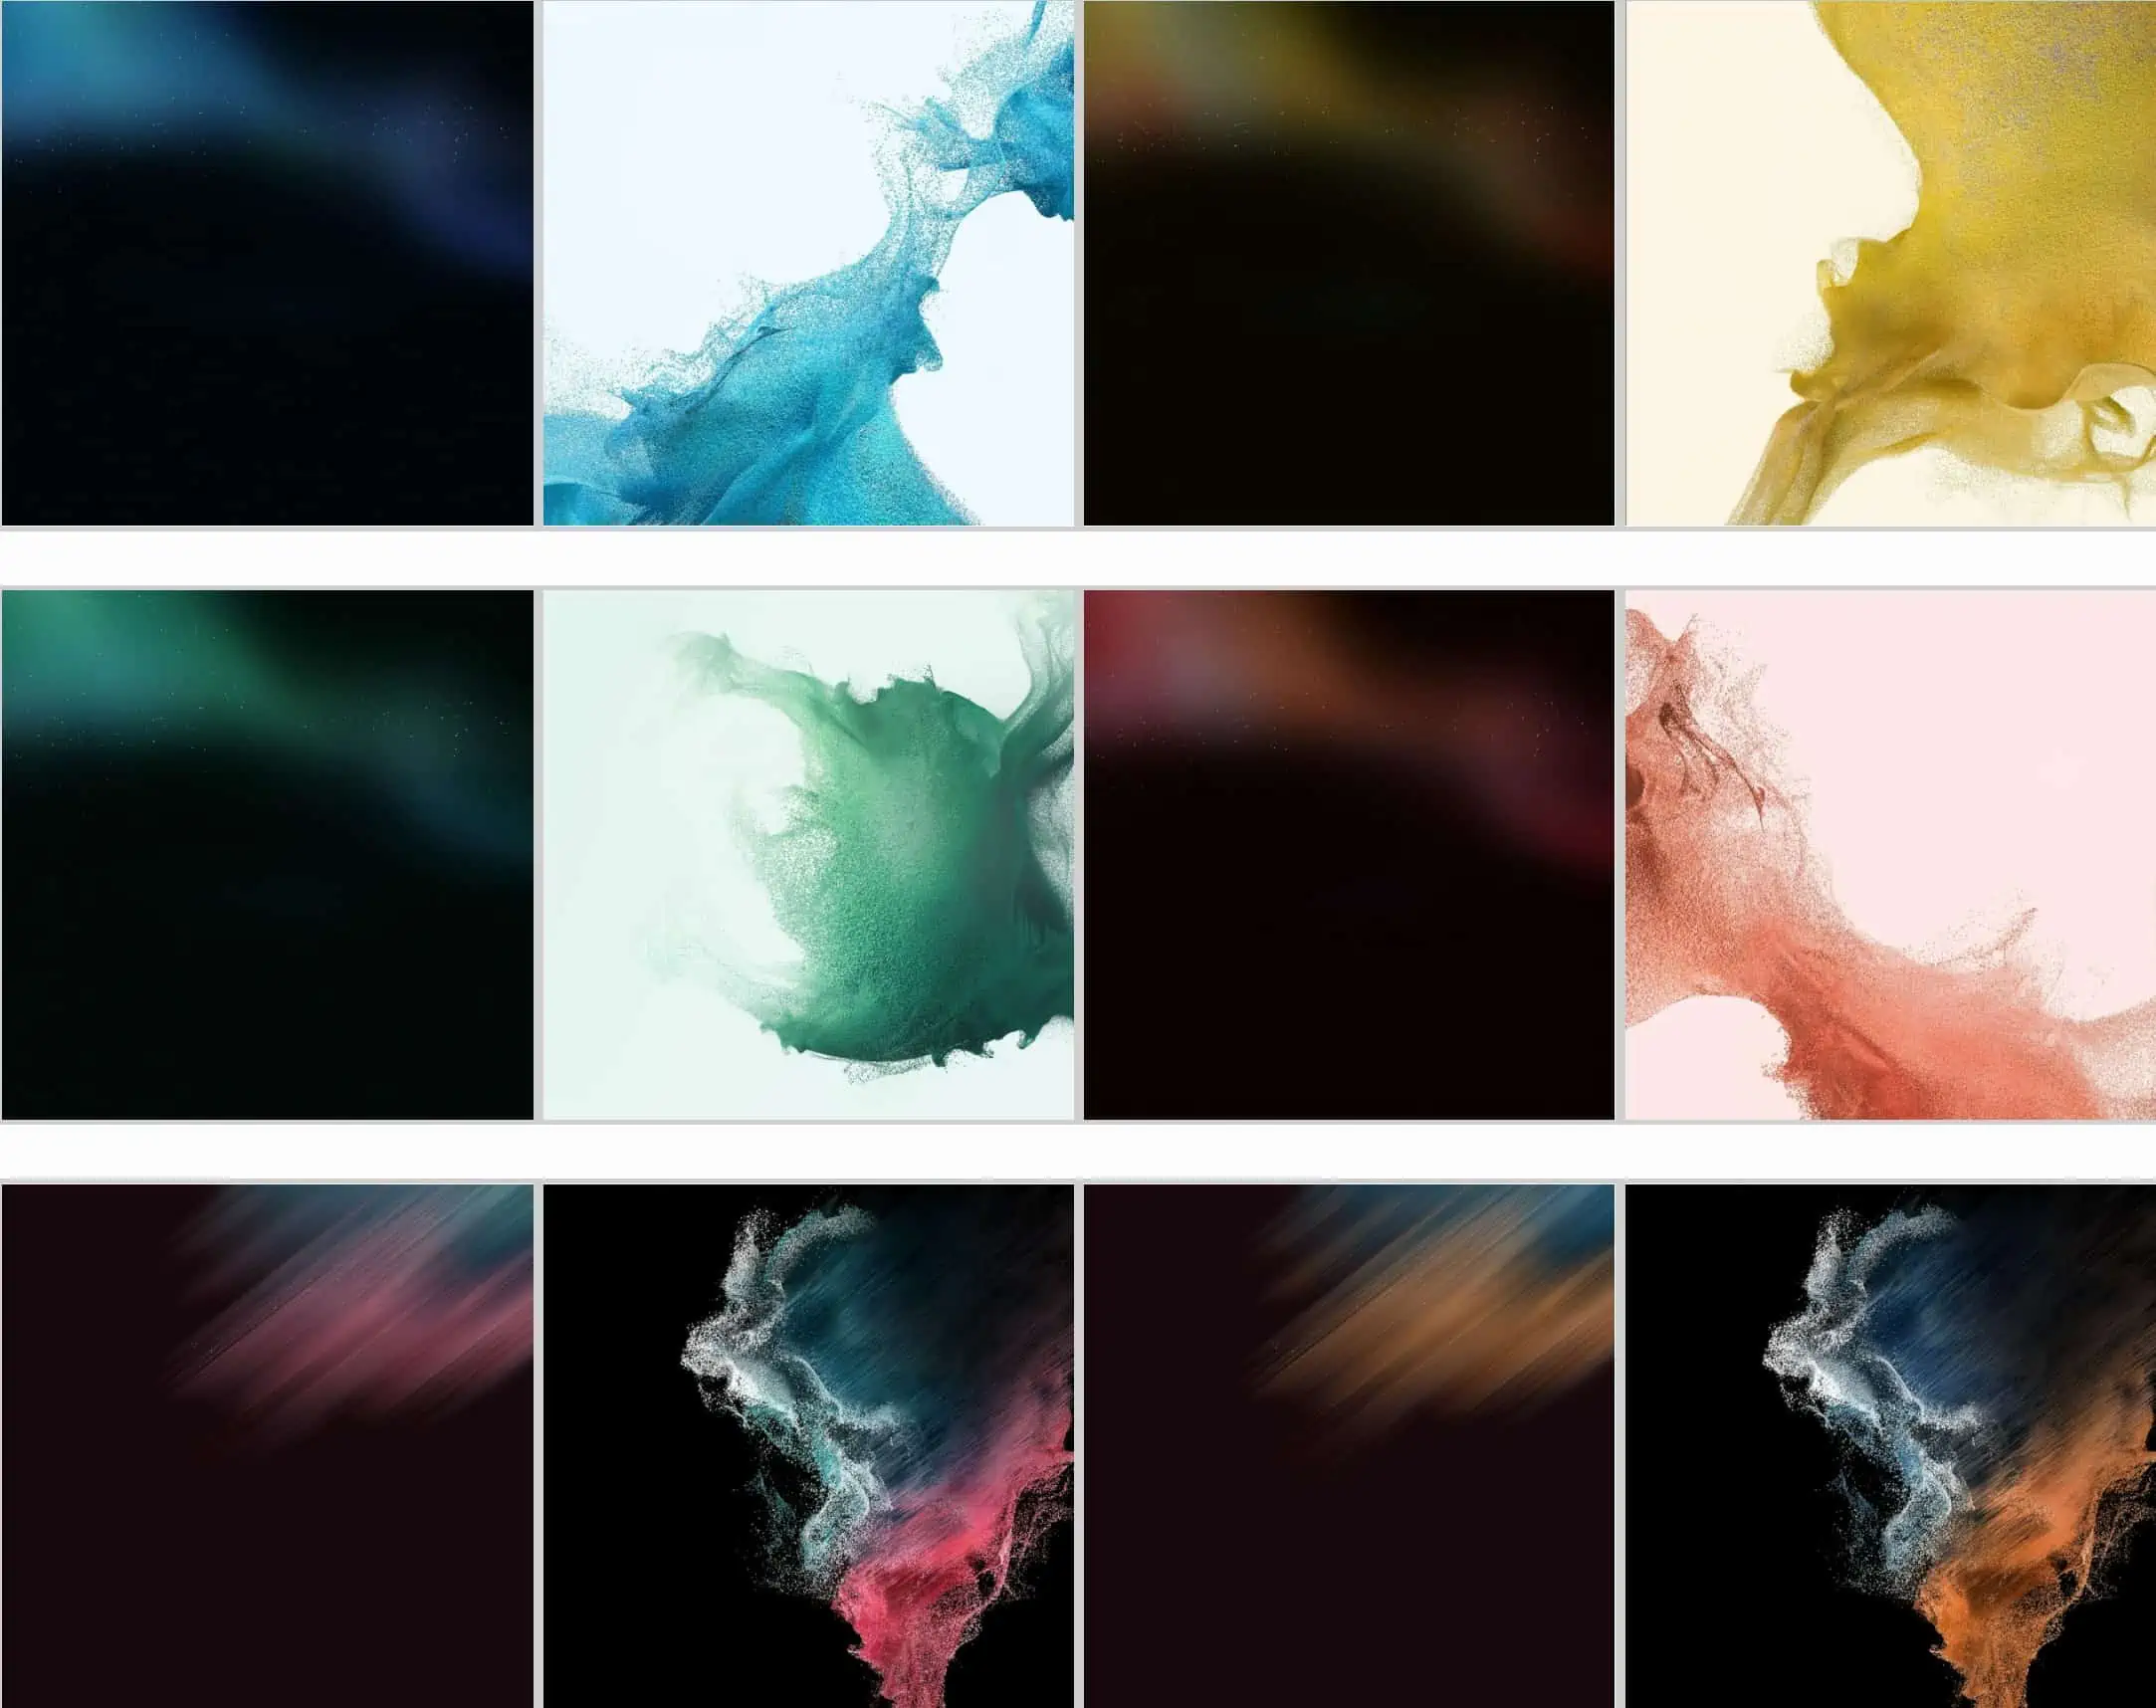 Download all of the new Samsung Galaxy S22 wallpapers